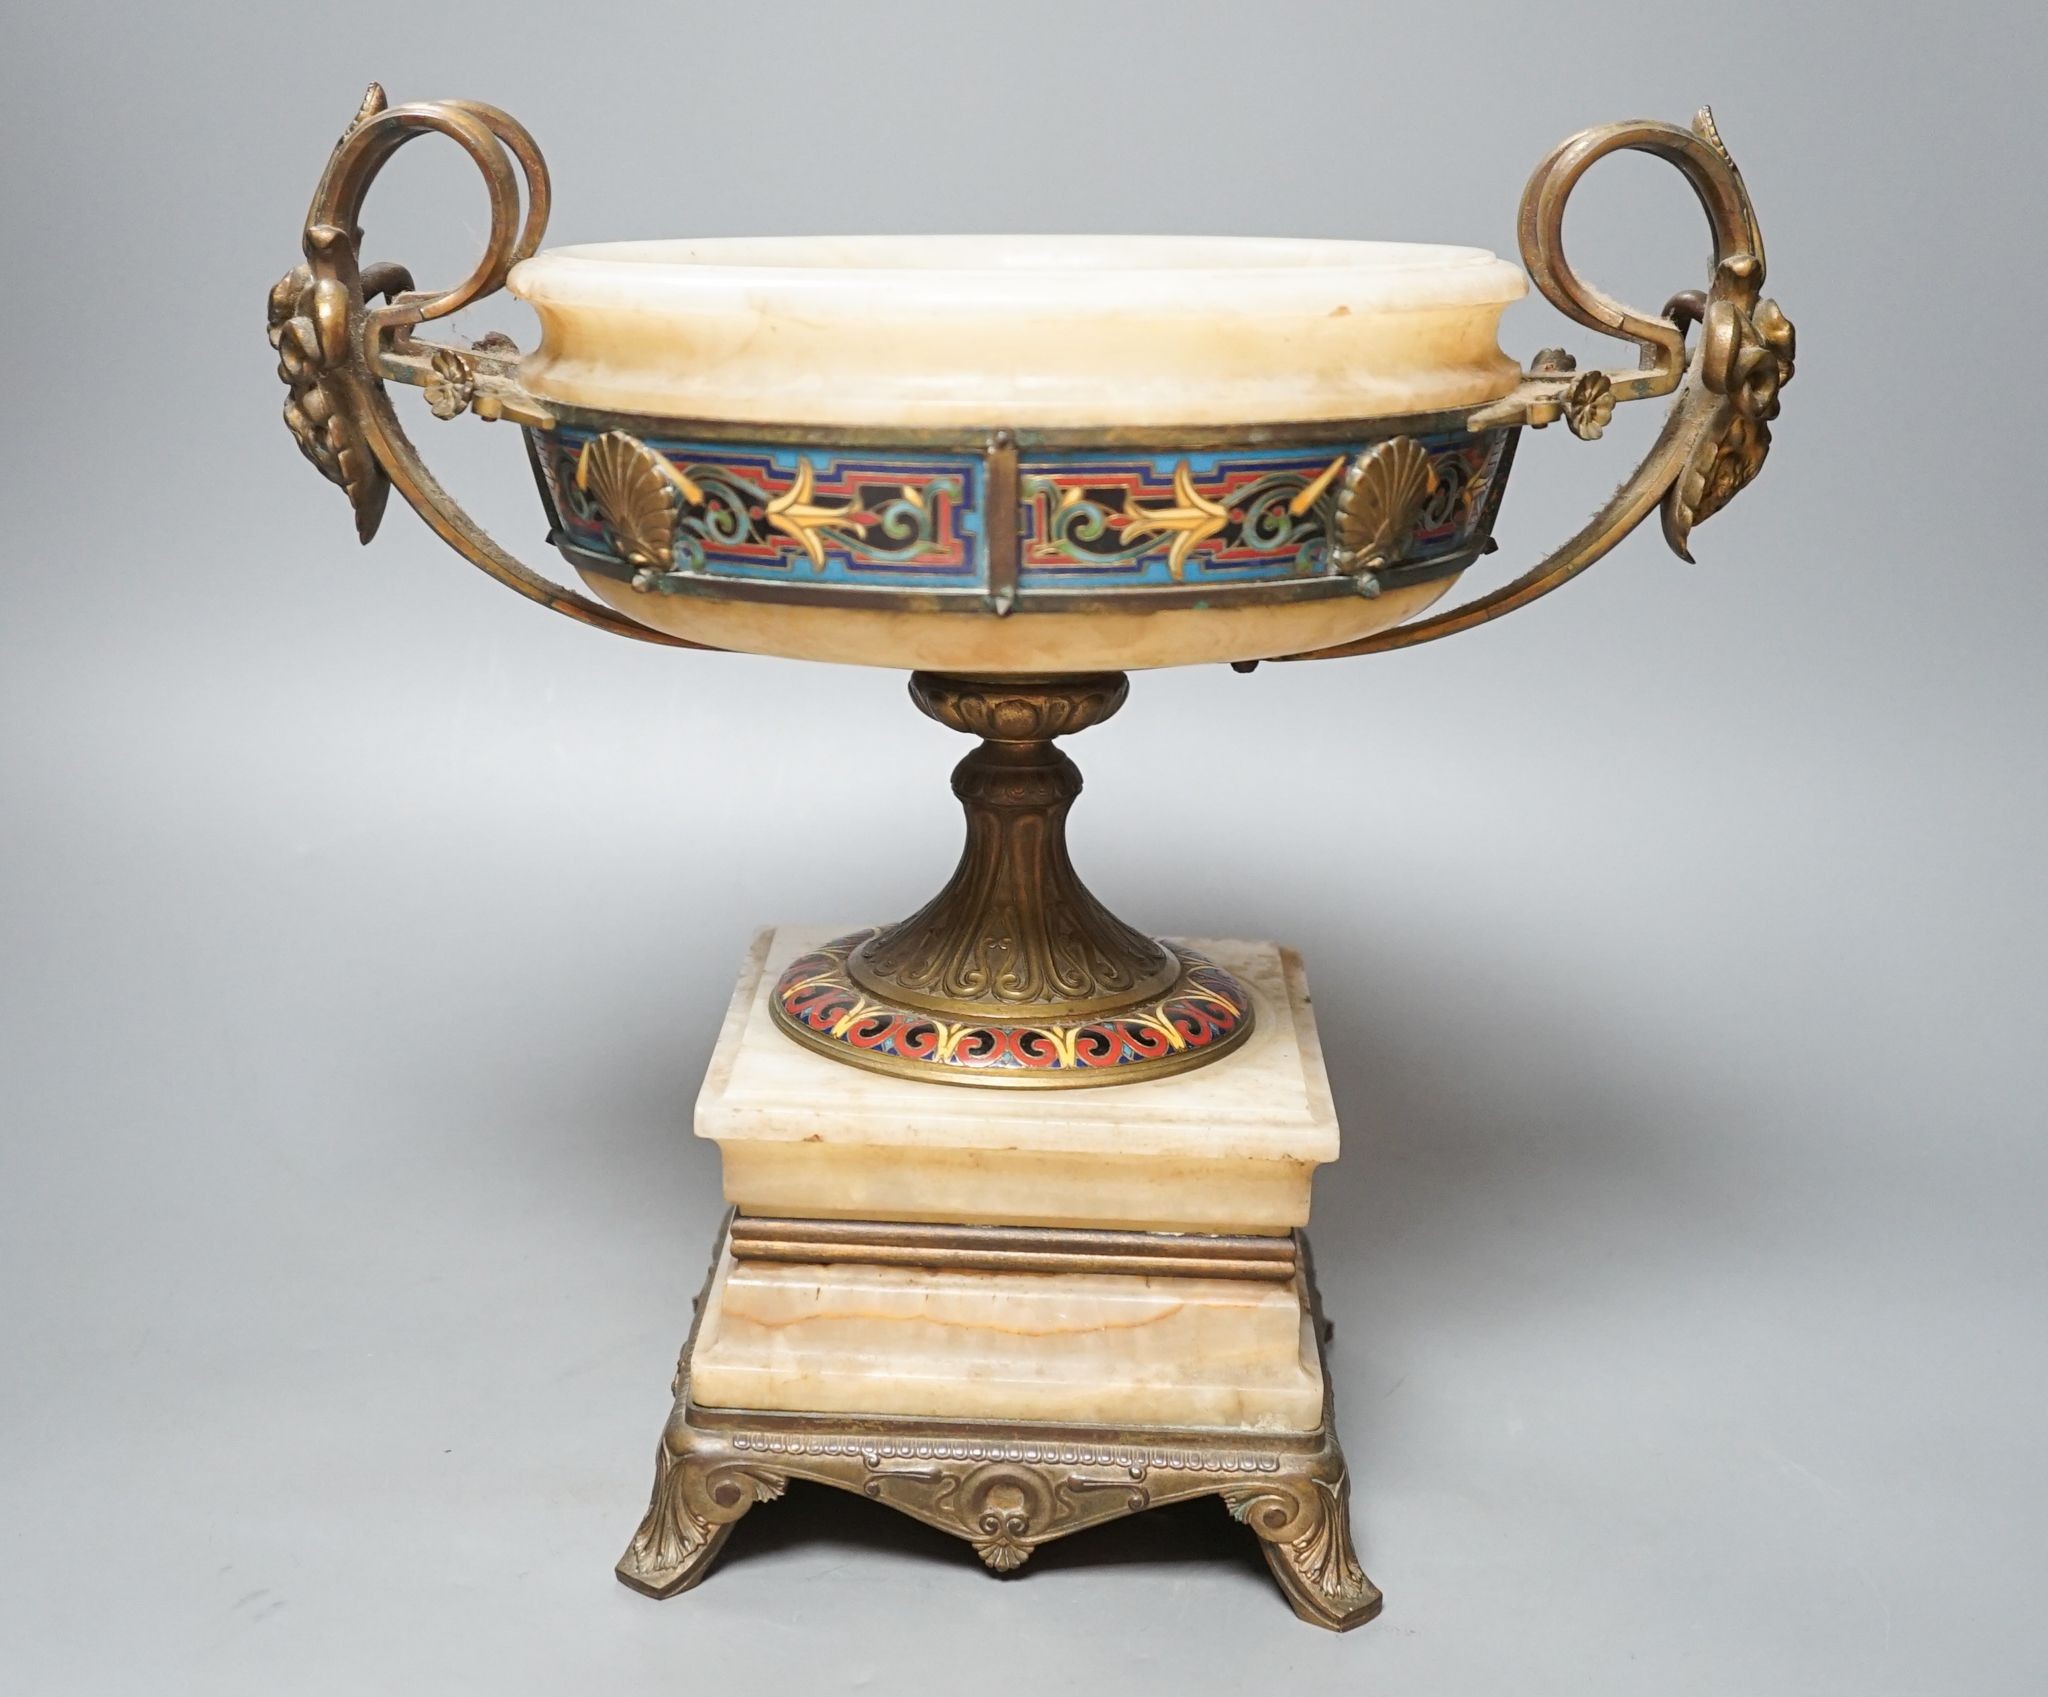 A late 19th century Barbedienne ormolu, champleve enamel and onyx centrepiece 30cm, engraved mark ‘F BARBEDIENNE’